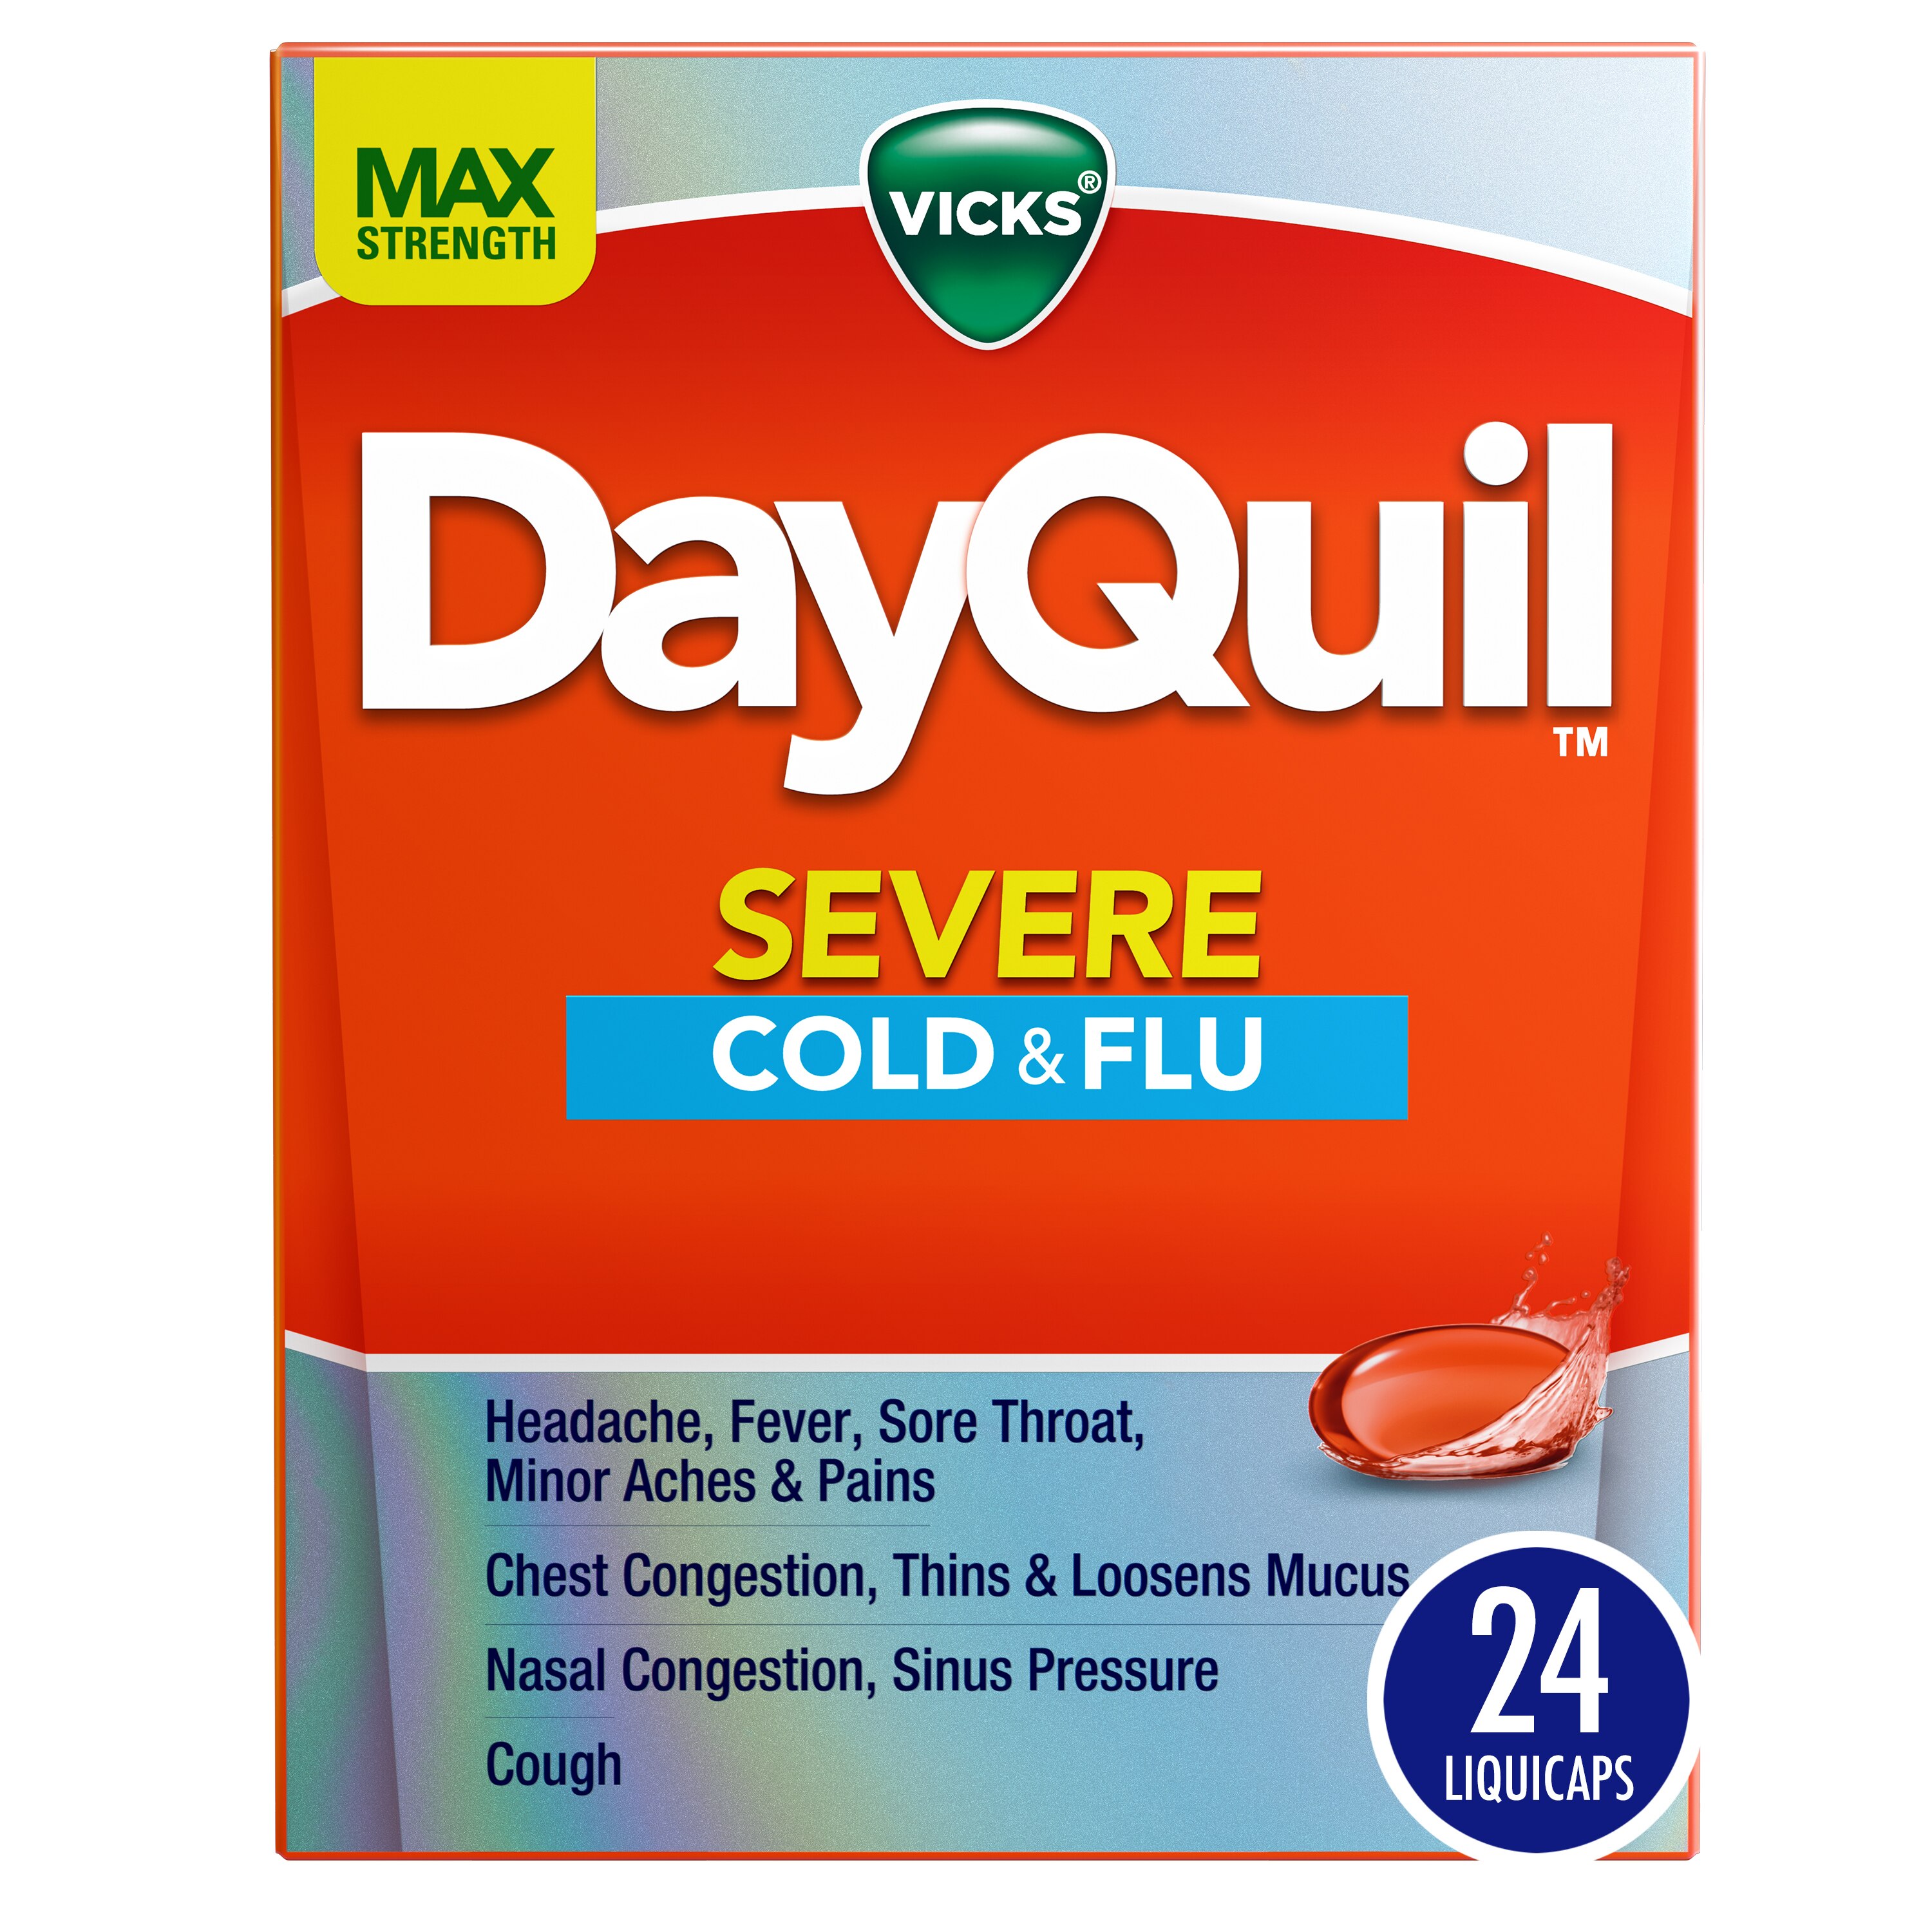 Vicks DayQuil SEVERE Cold, Flu and Congestion Medicine Liquicaps, Maximum Strength - Relieves Cough, Sore Throat, Fever, Chest Congestion, 24 CT